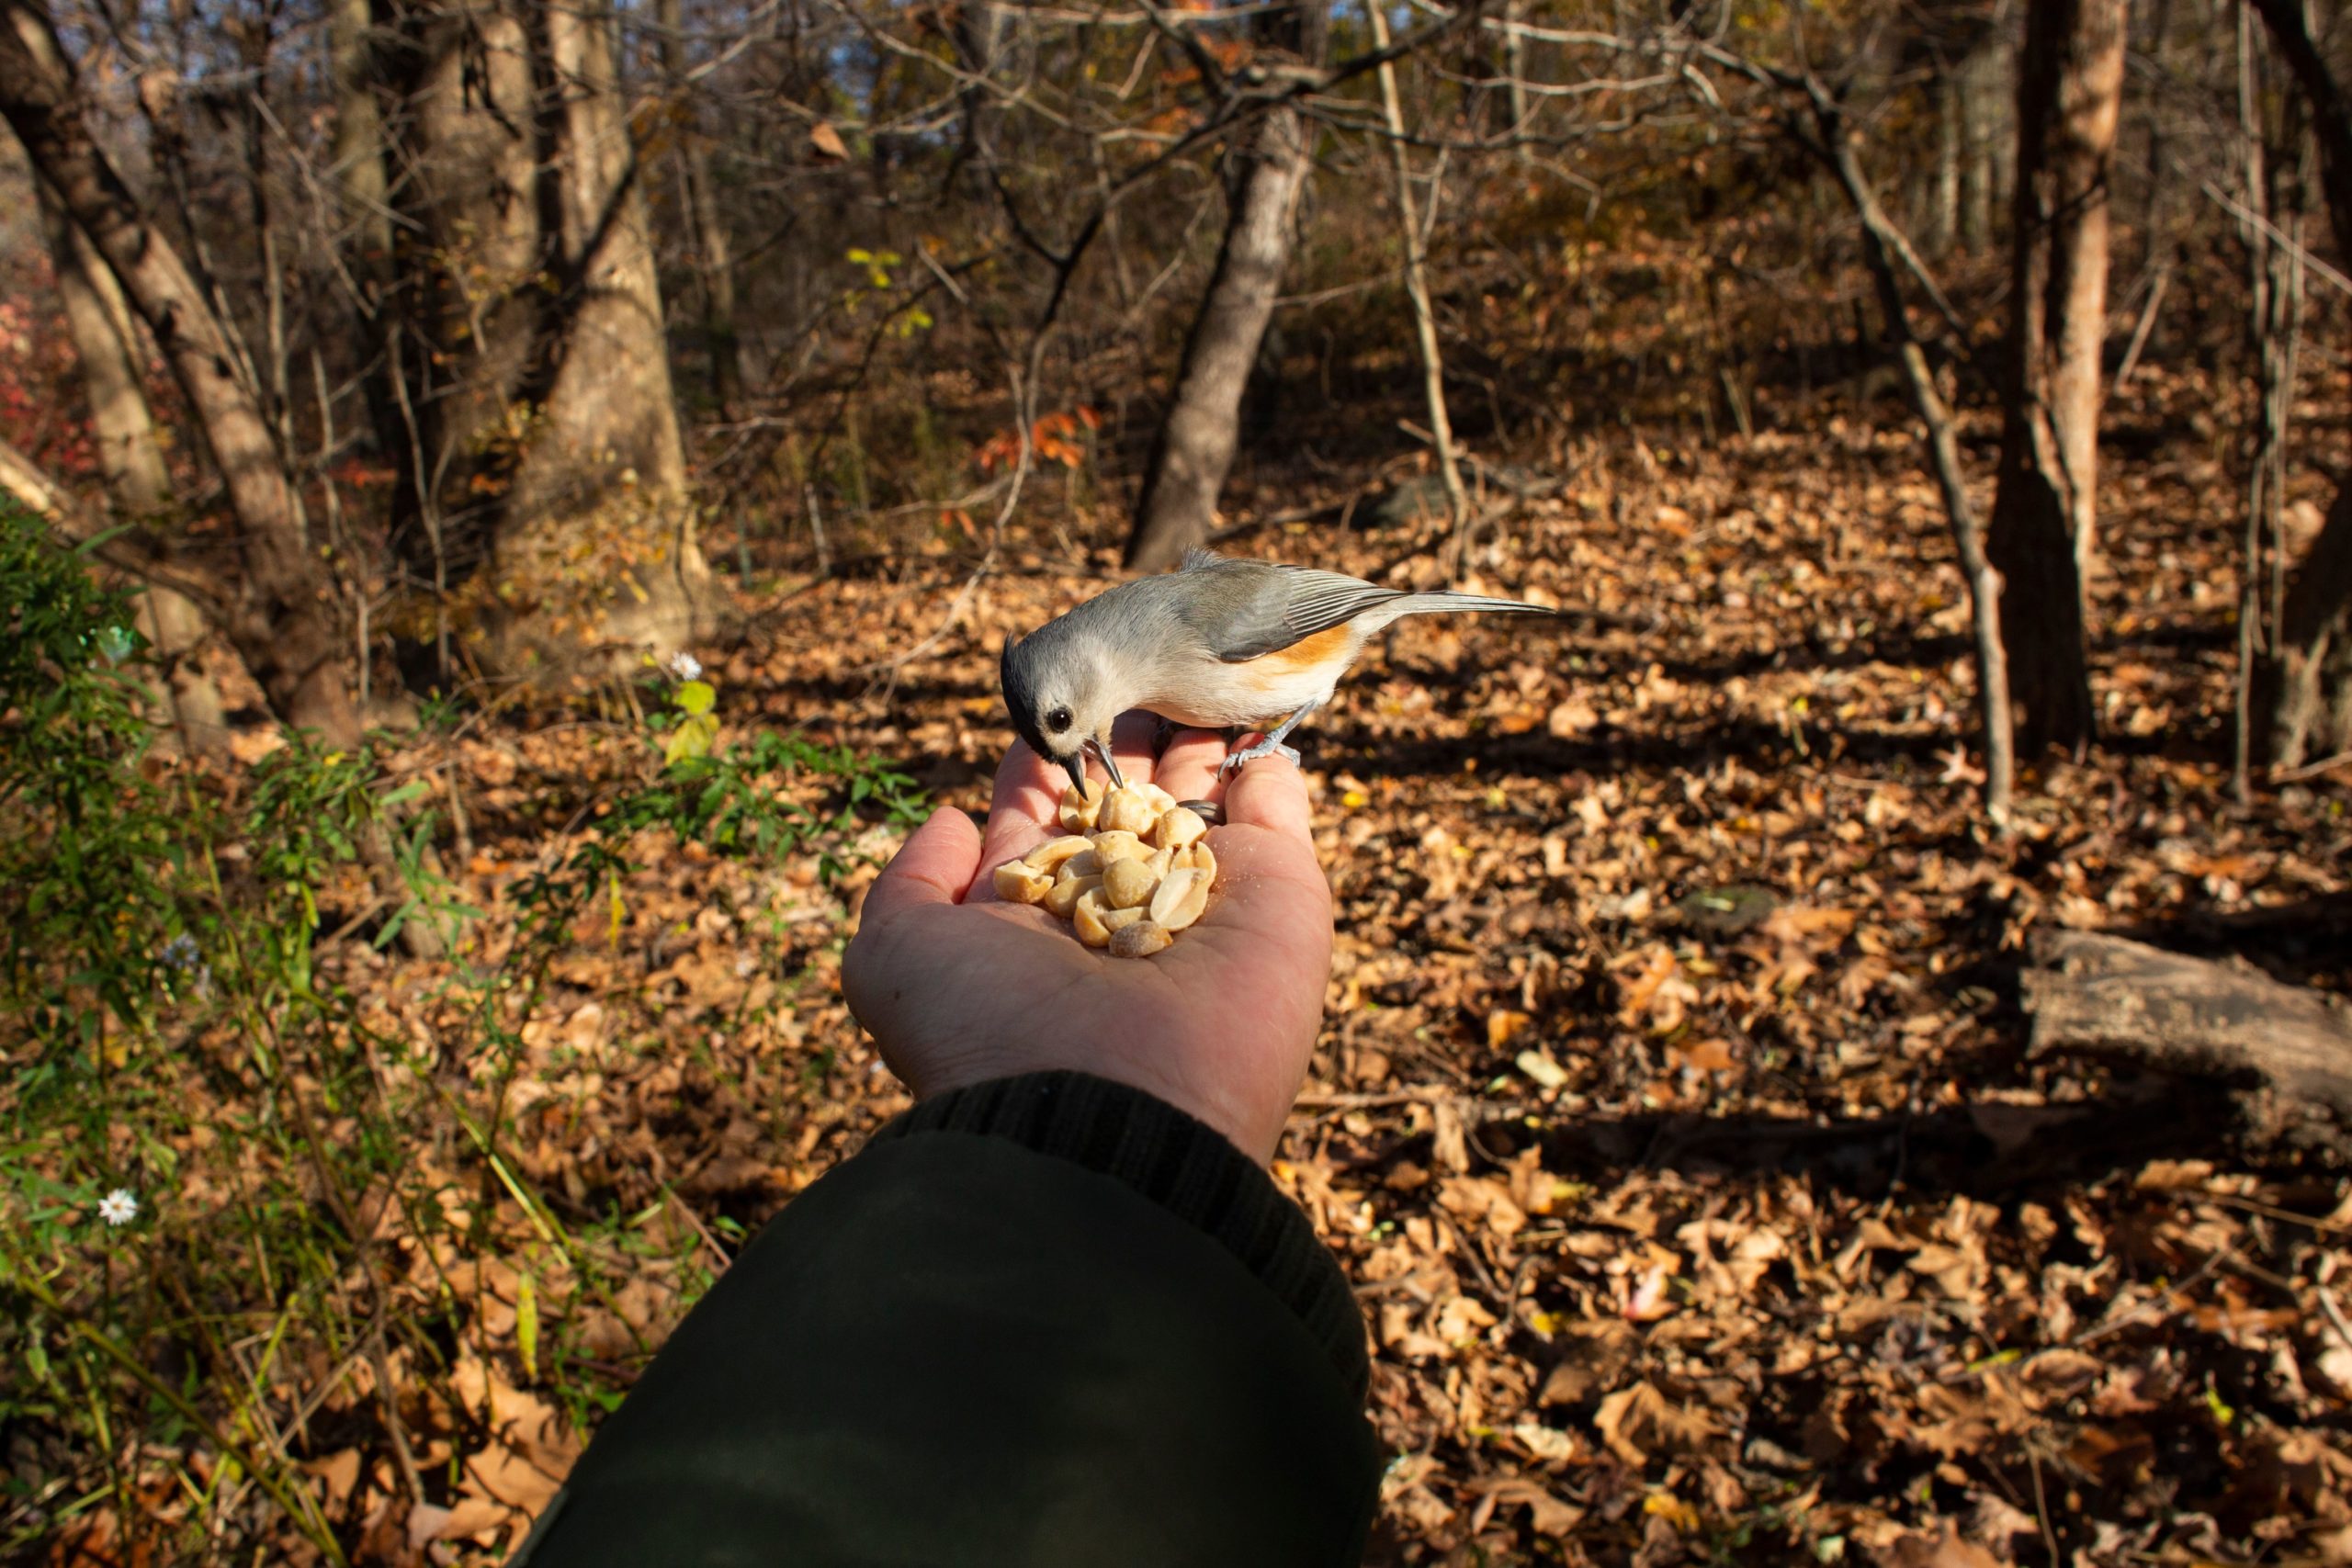 A photographer feeds a Tufted Titmouse bird during a tour in Central Park, New York on Nov. 29. (Kena Betancur/AFP via Getty Images)